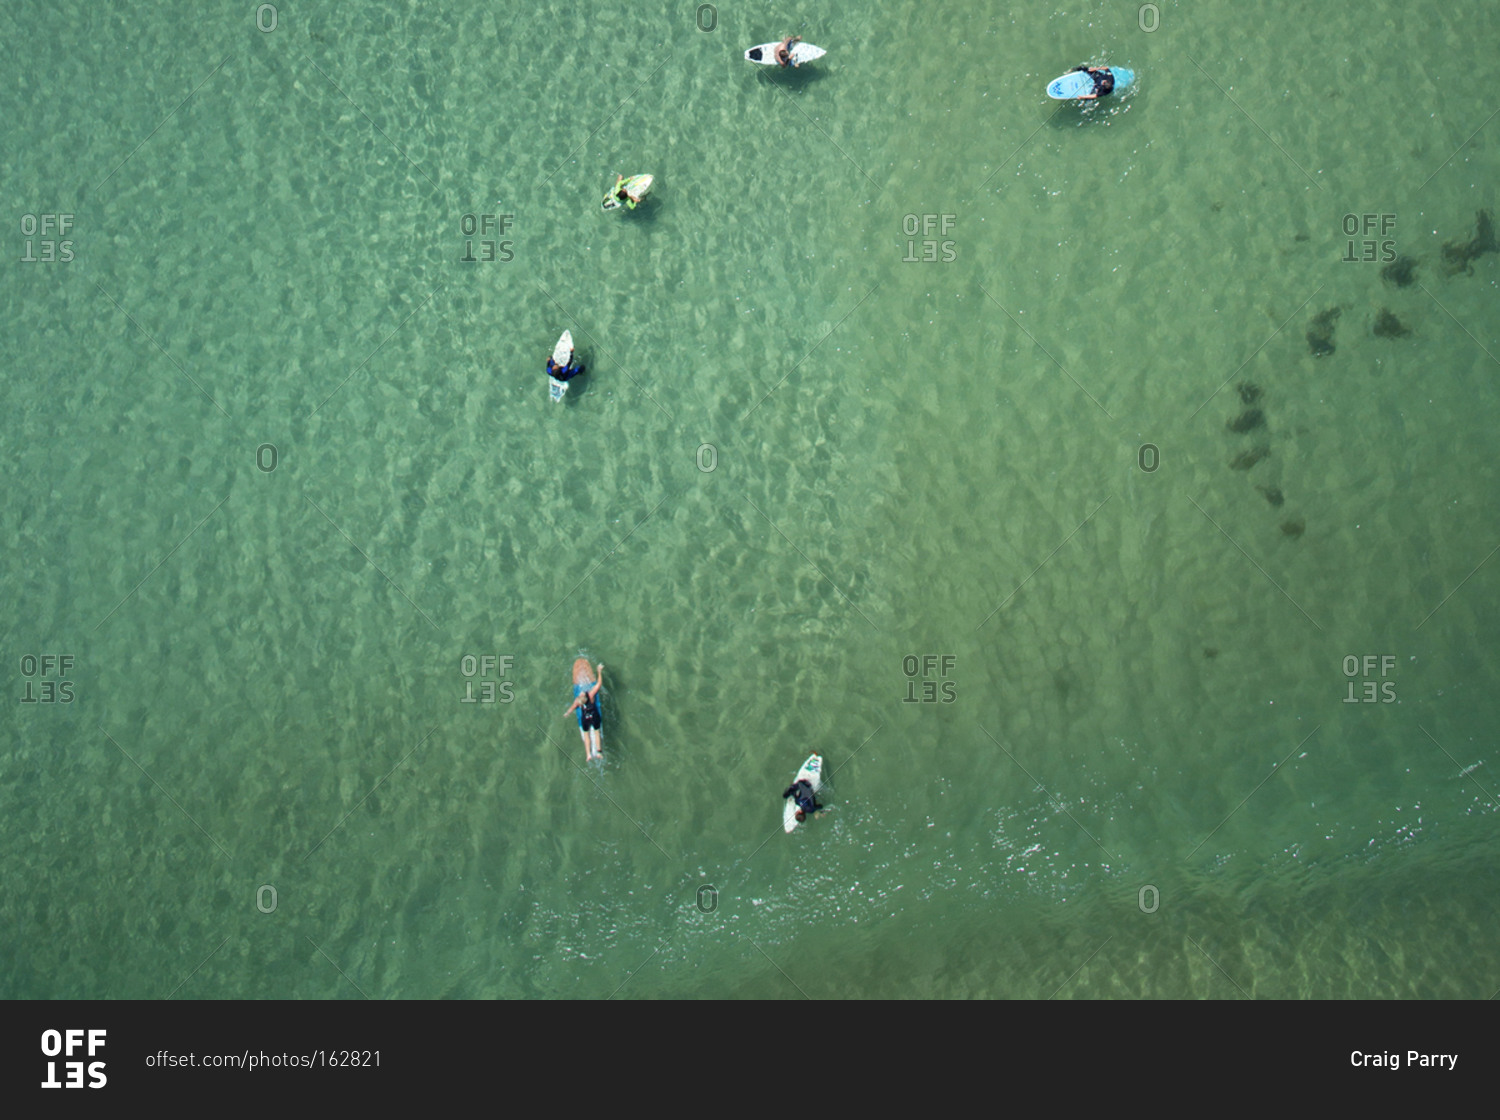 Aerial view of surfers in still water